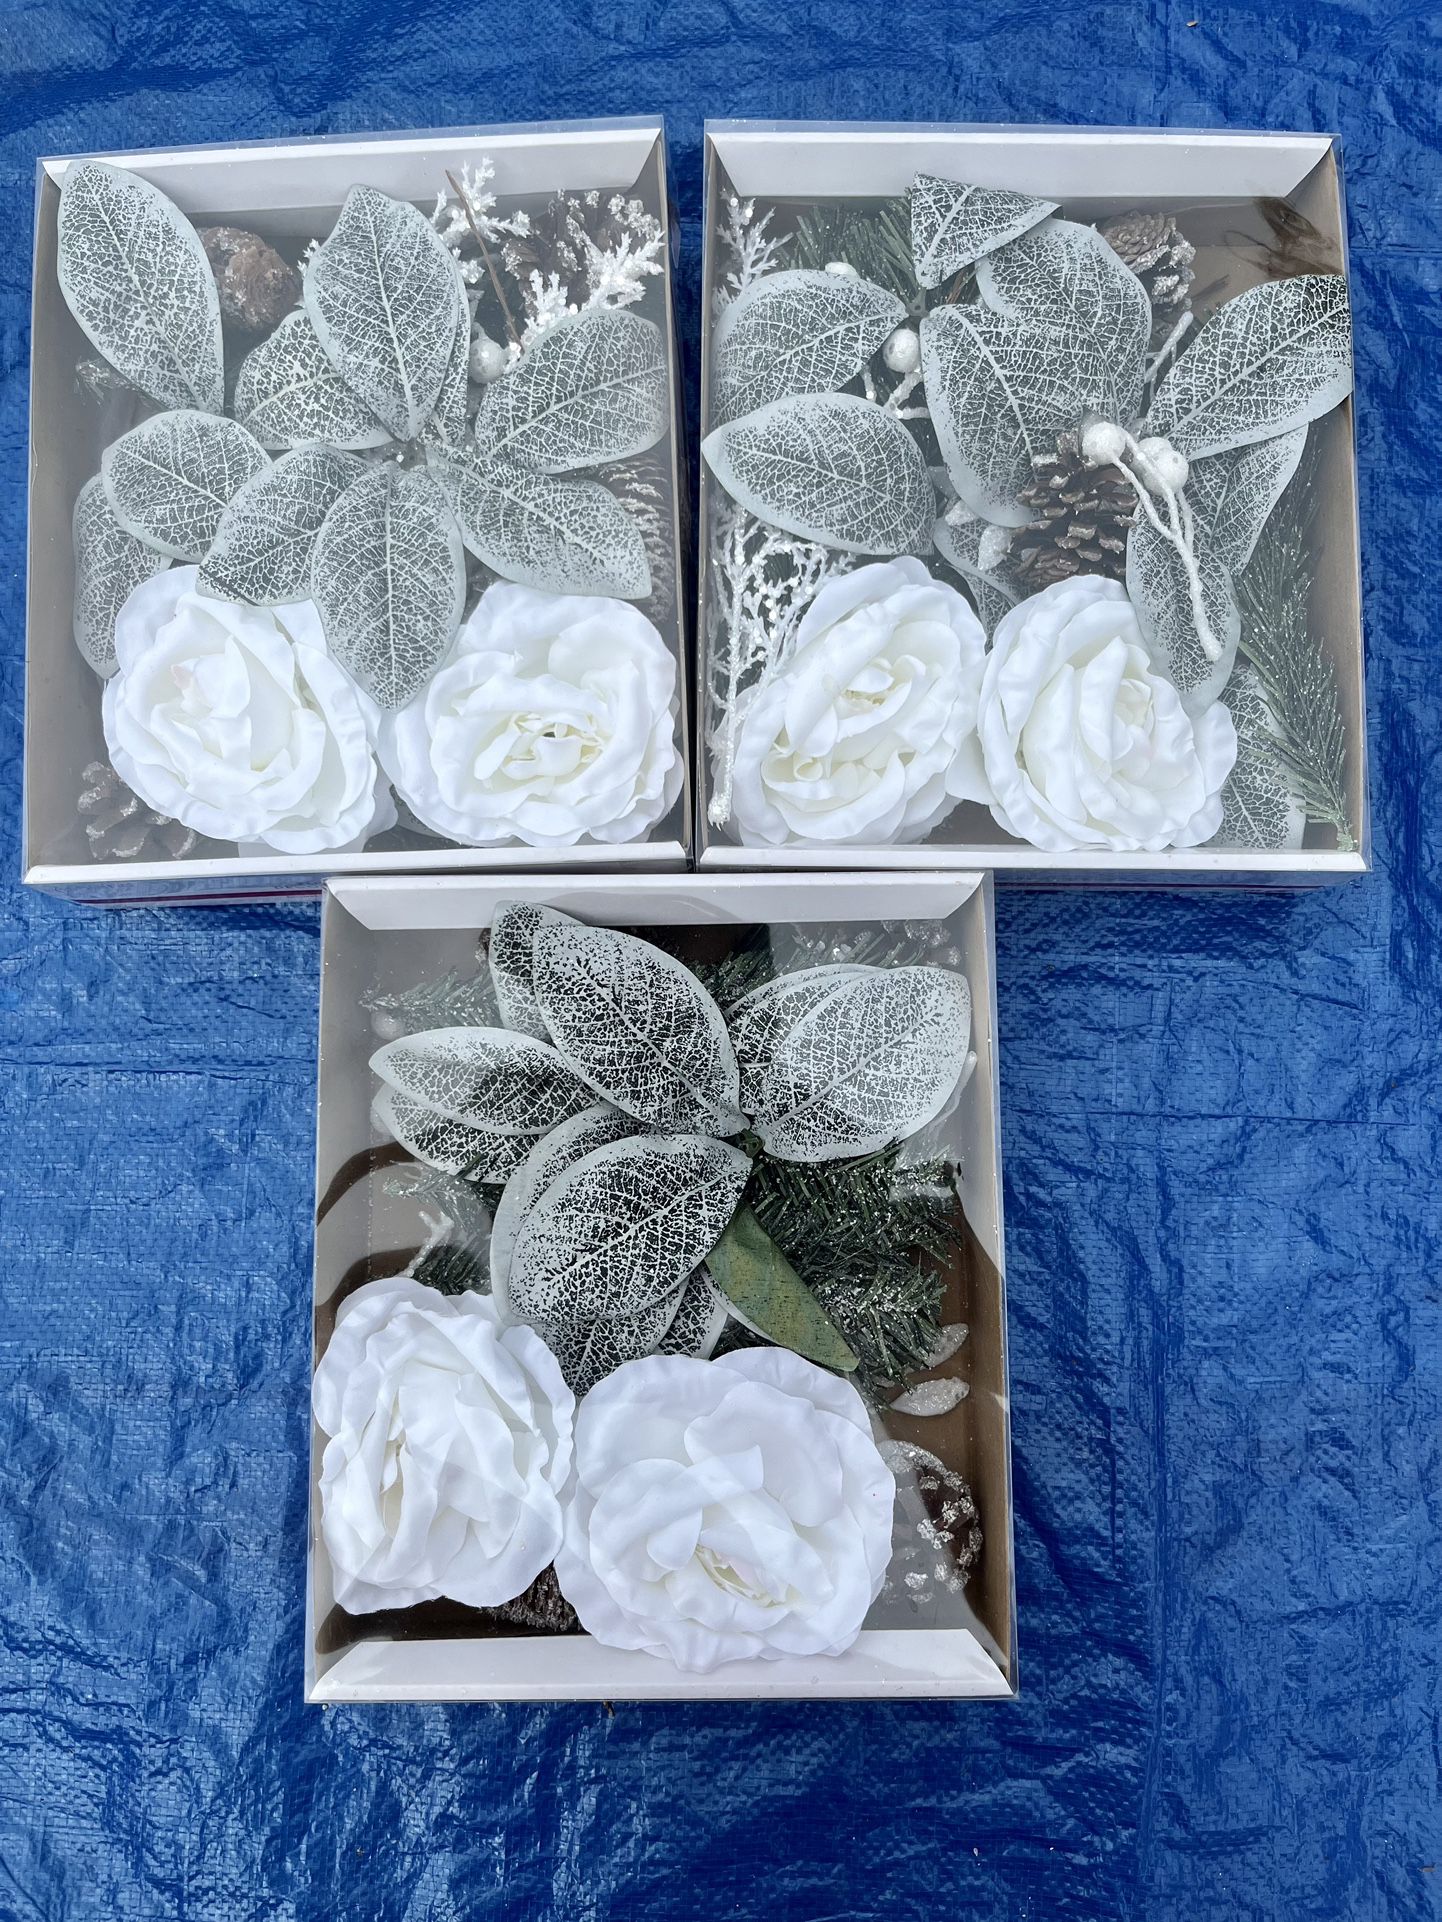 3 Boxes Of Michael’s Brand-Ashland Floral Decor  Accents Wreath Or Craft Christmas Or Anytime Flower/Pine cone And More 